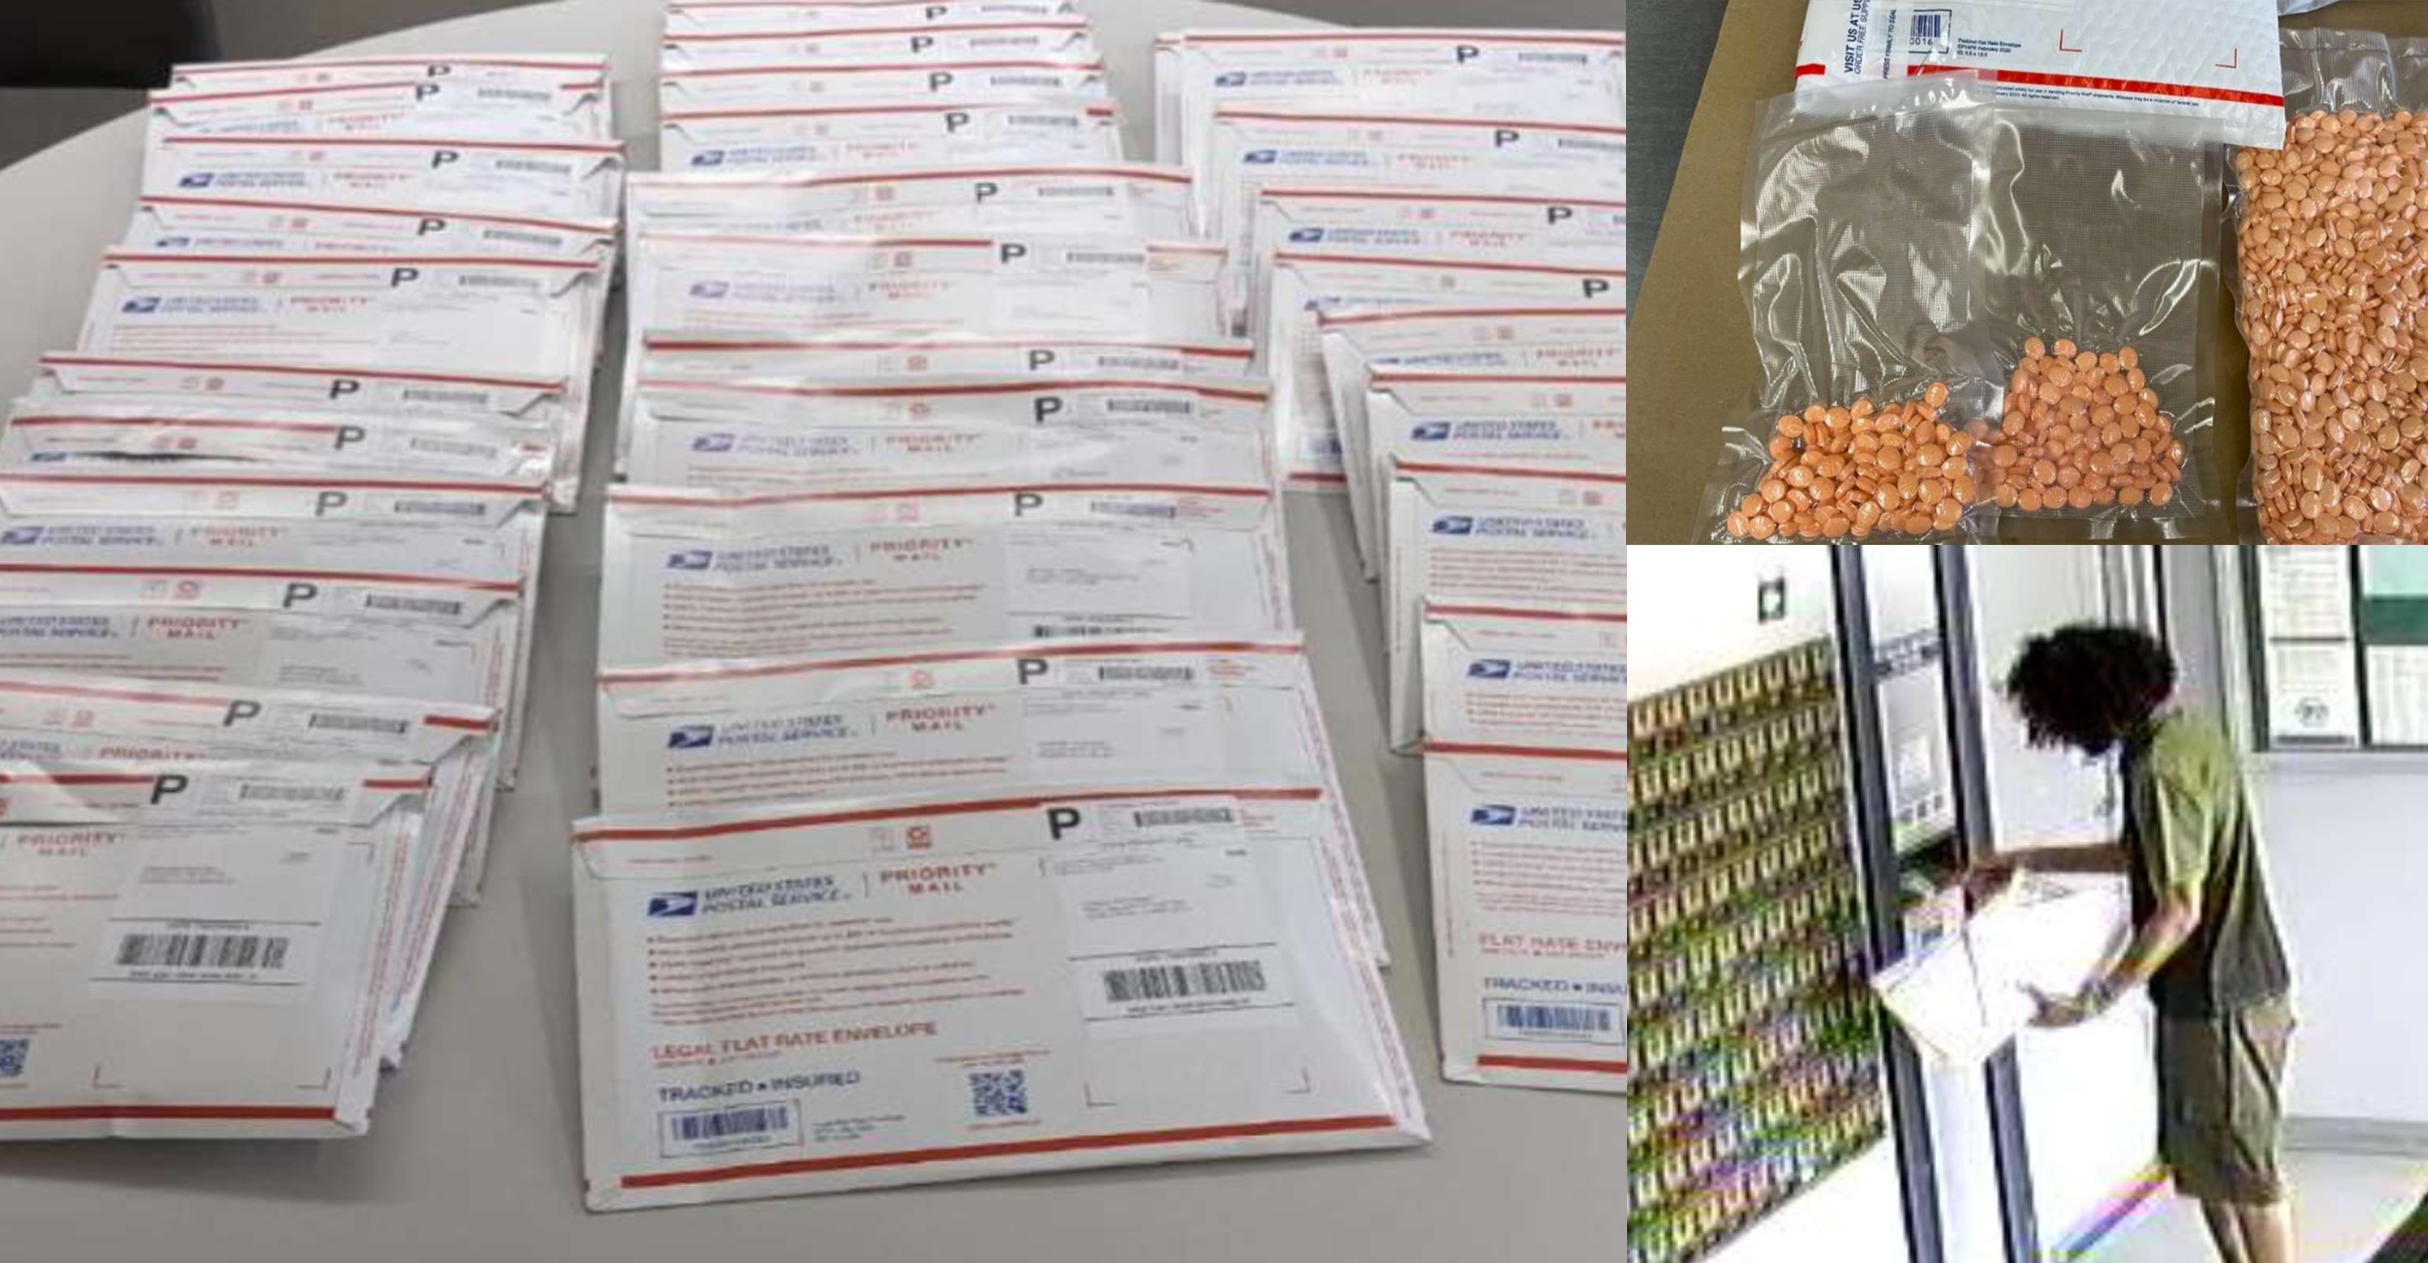 Darknet Drug Dealers Arrested After Packages of Meth-Laced Adderall Repeatedly Returned to Sender